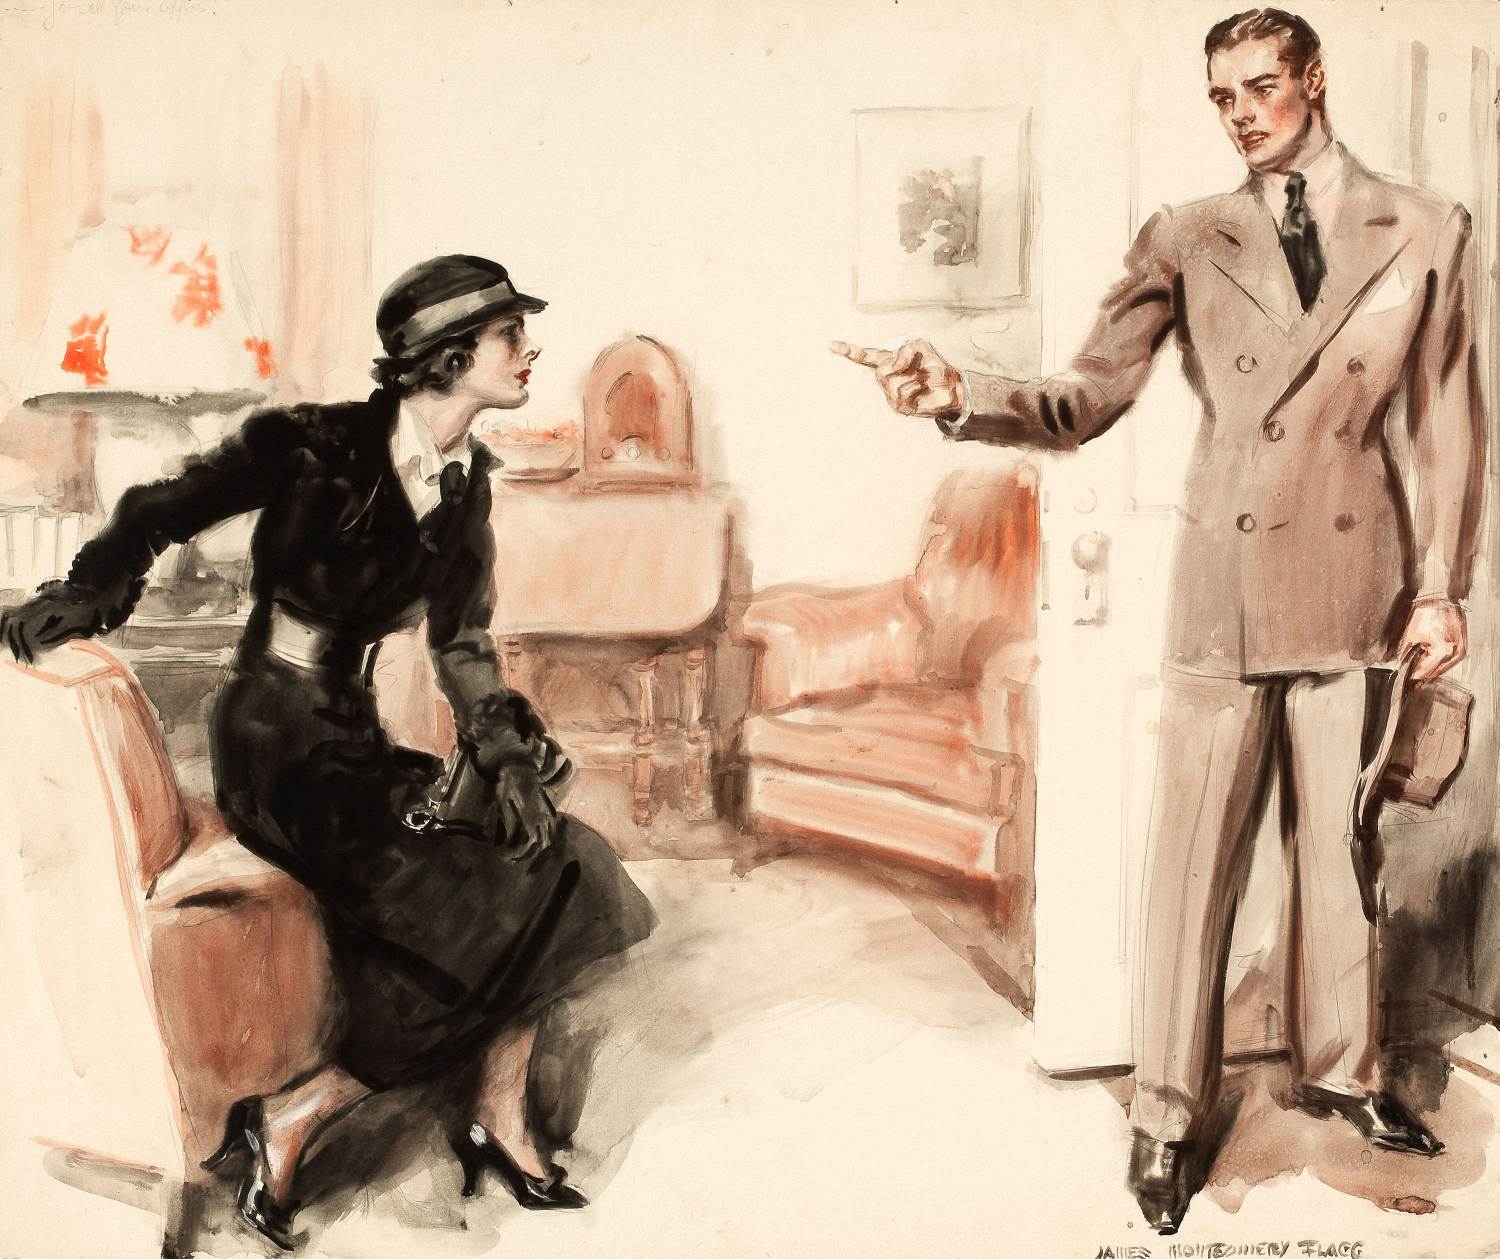 The Command by James Montgomery Flagg